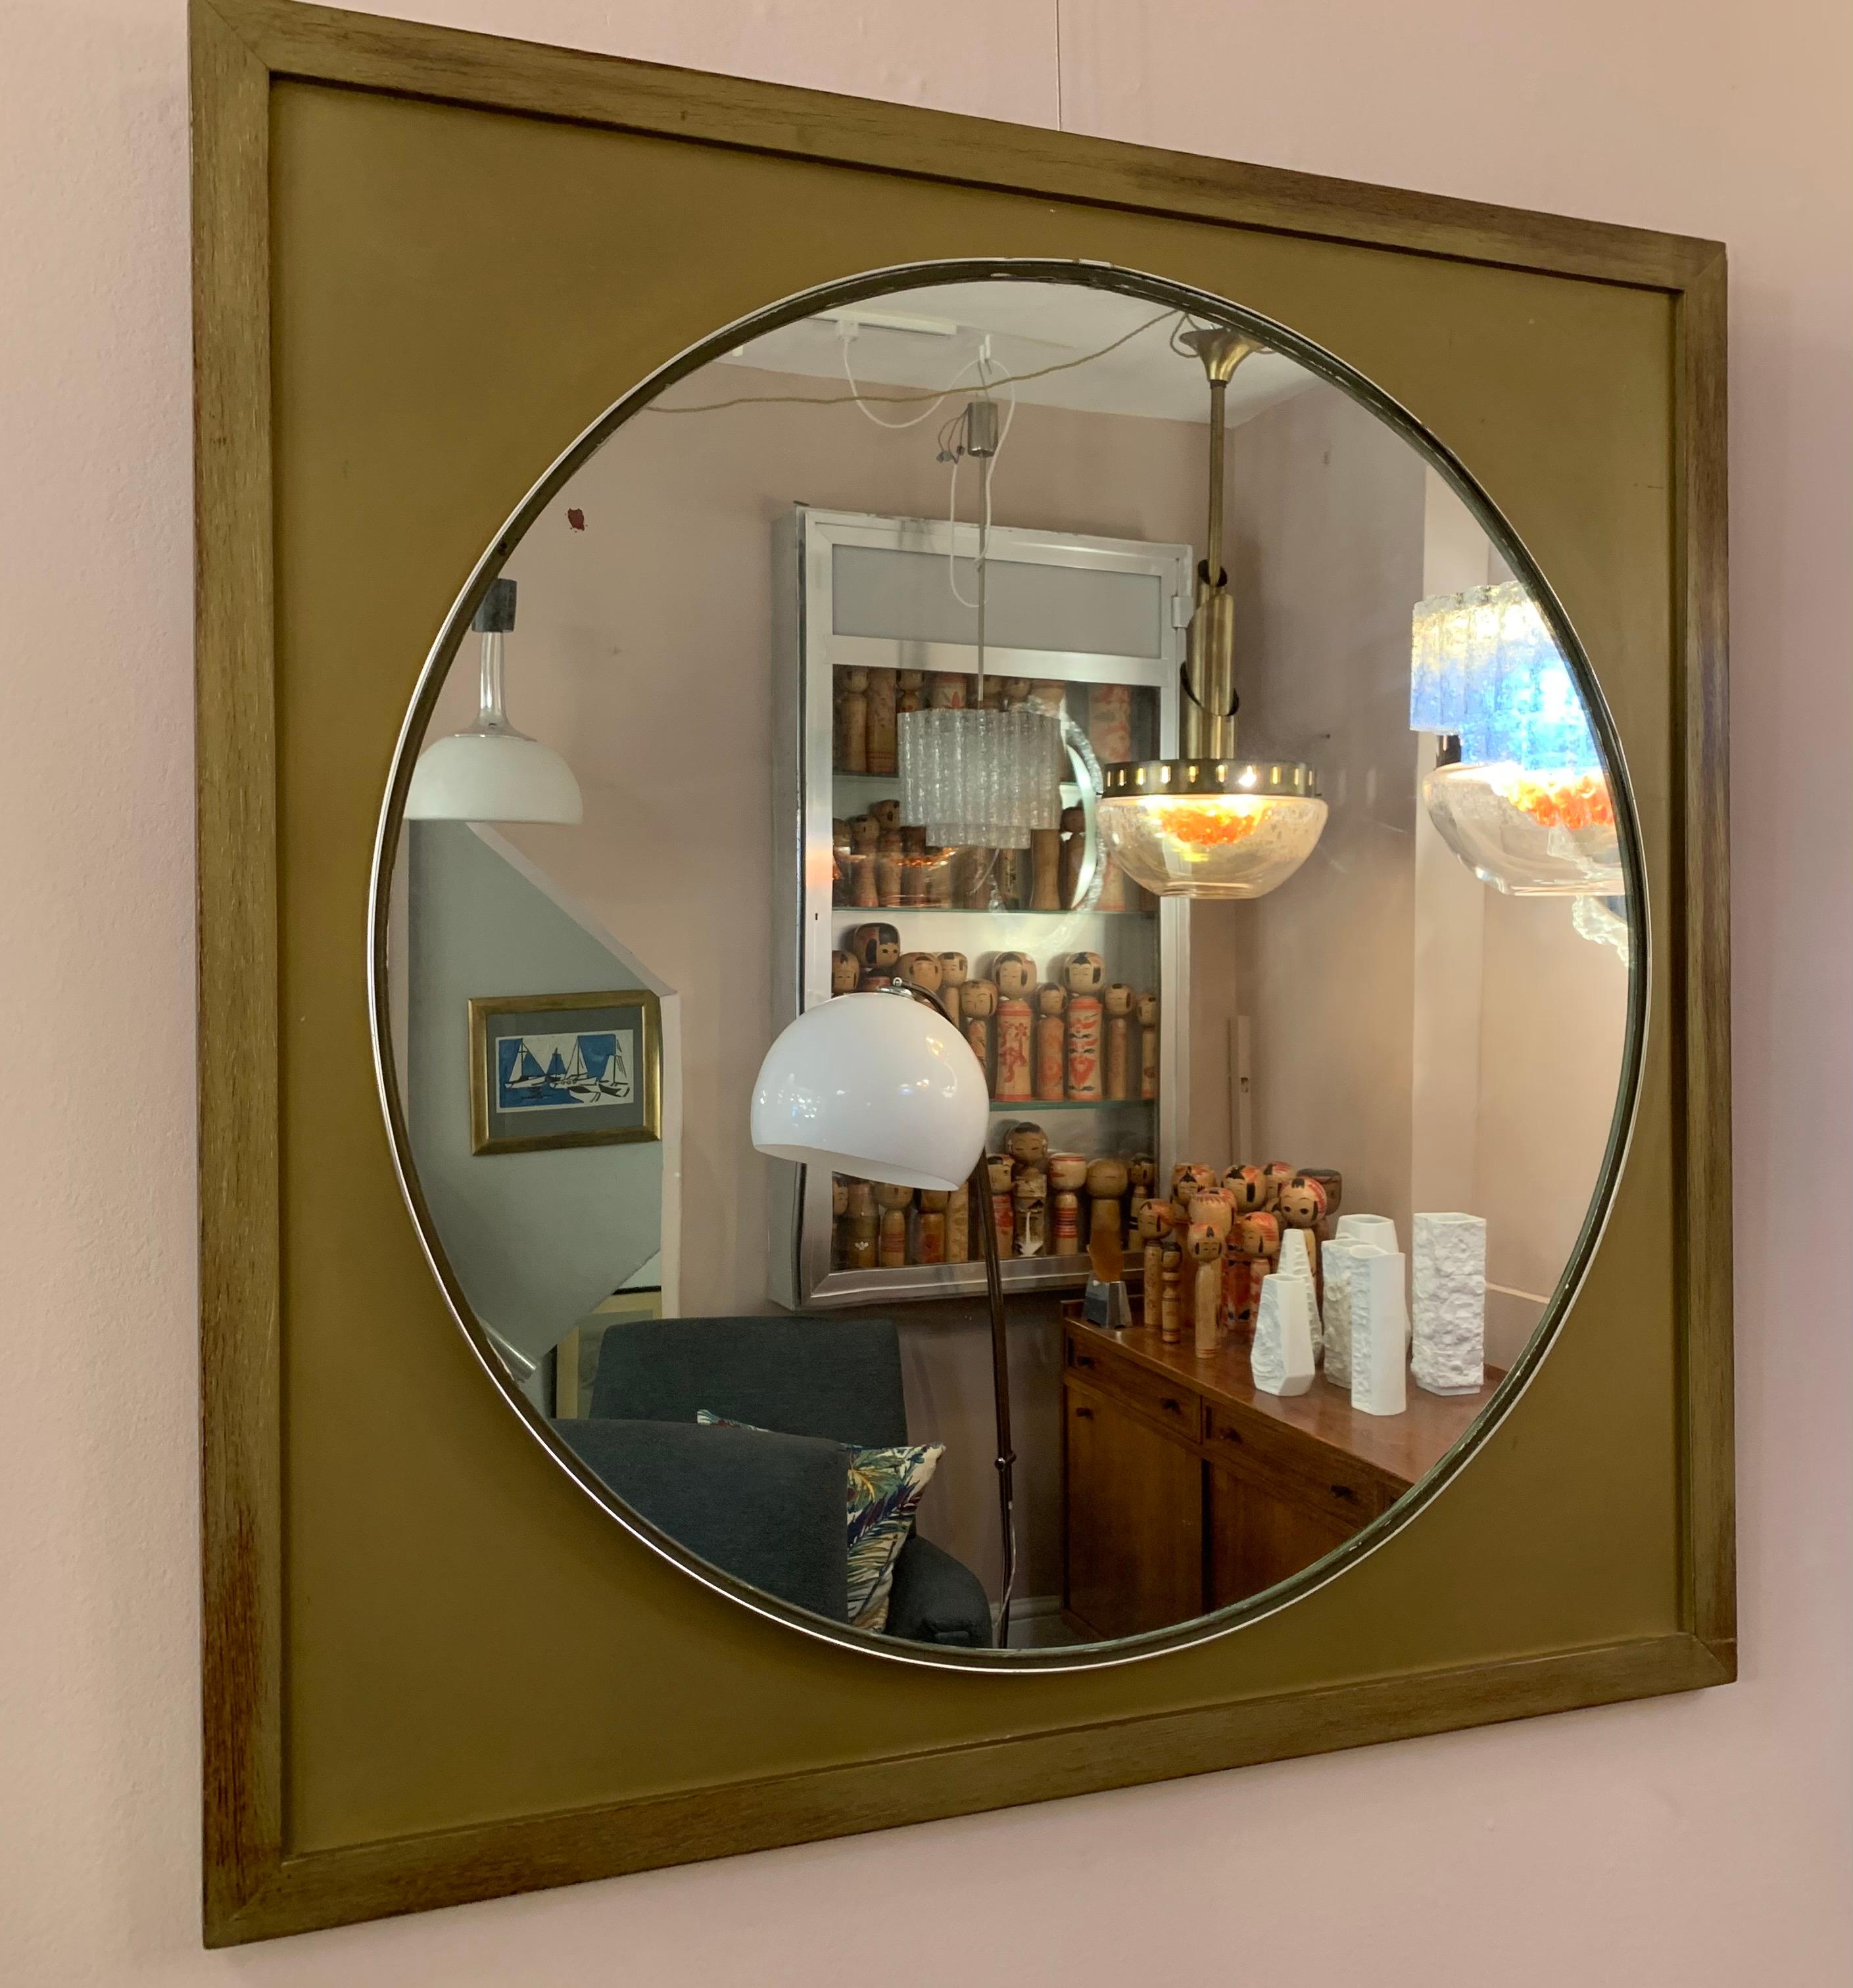 An unusual Scandinavian 1970s mid century round mirror on a wooden frame. The wooden frame is painted gold with the grain showing through on the outside edges. The circular glass mirror is surrounded a small rubber band which holds it in place in